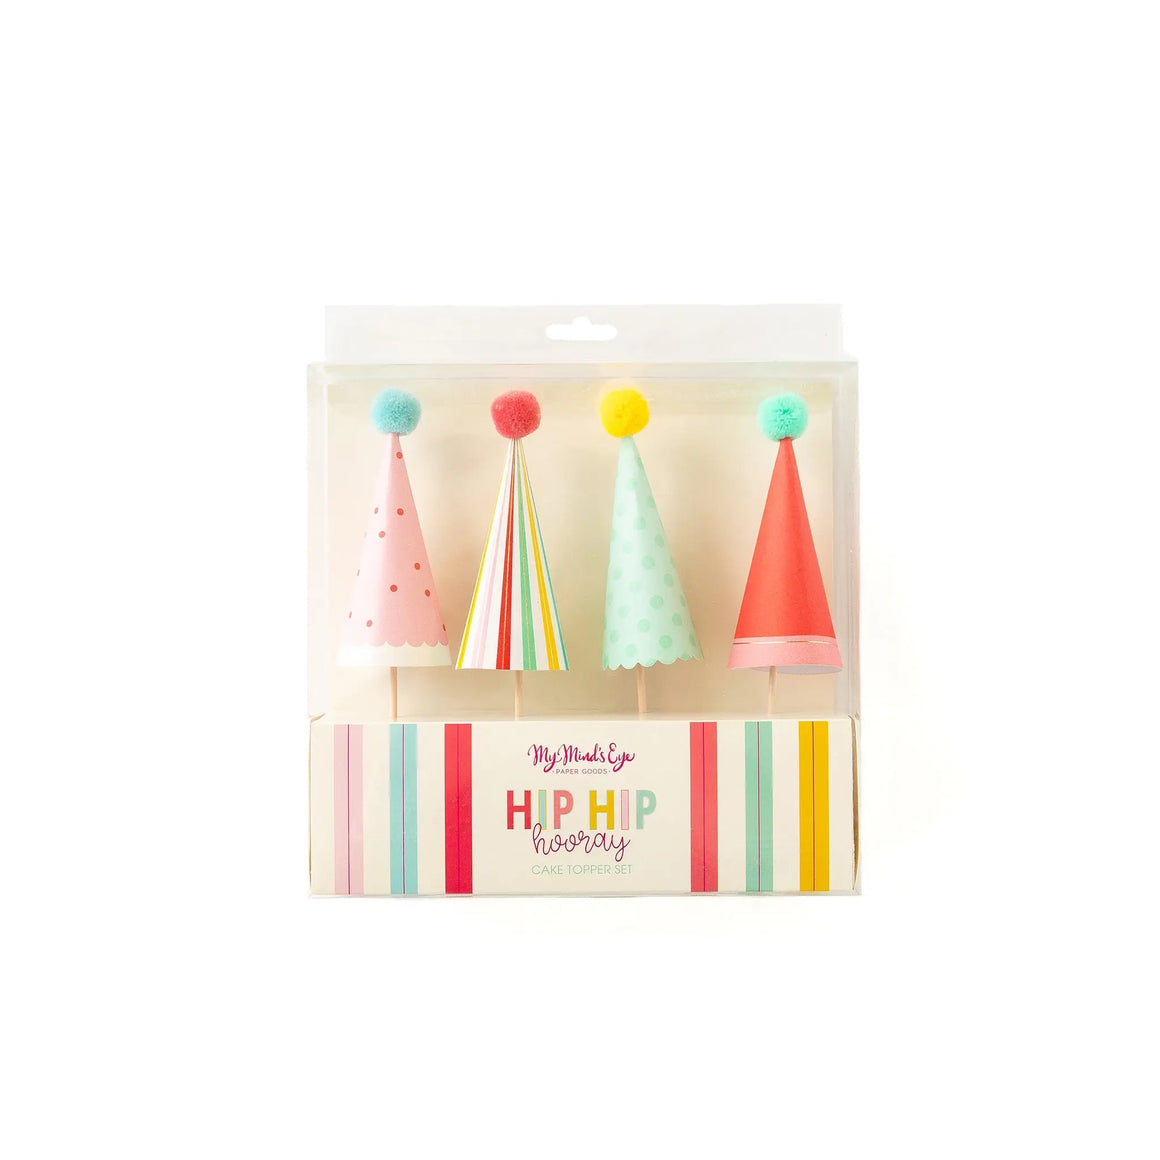 CAKE TOPPER - PARTY HATS